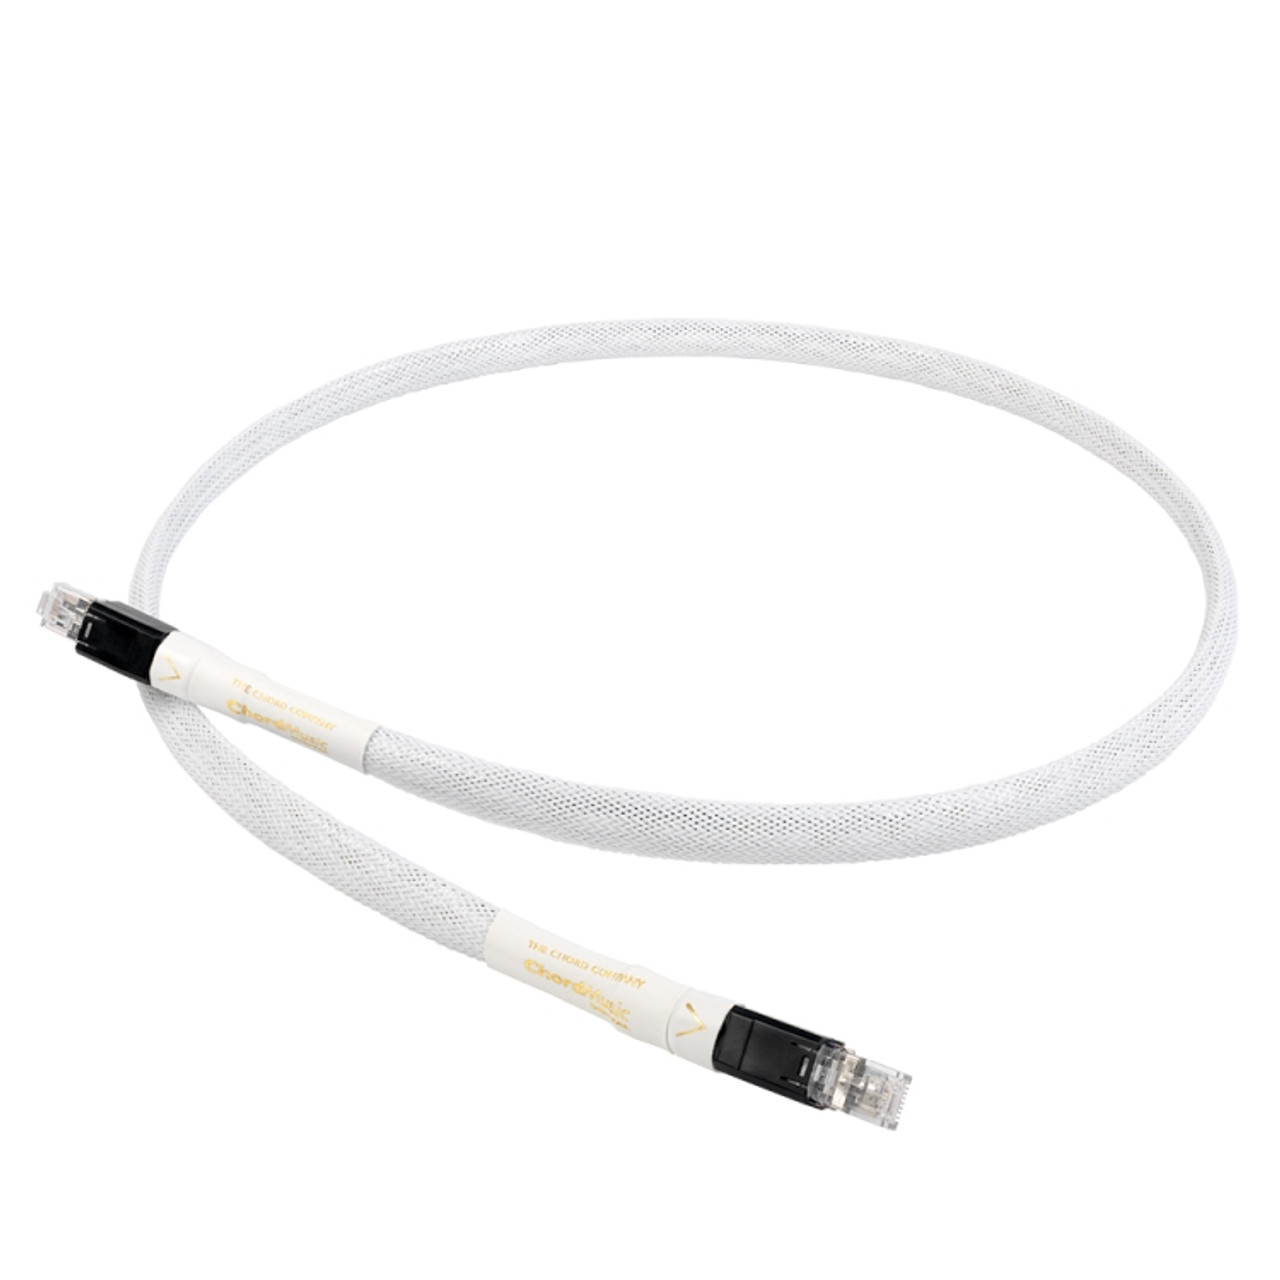 ChordMusic Digital Streaming Cable | The Chord Company | The Sound